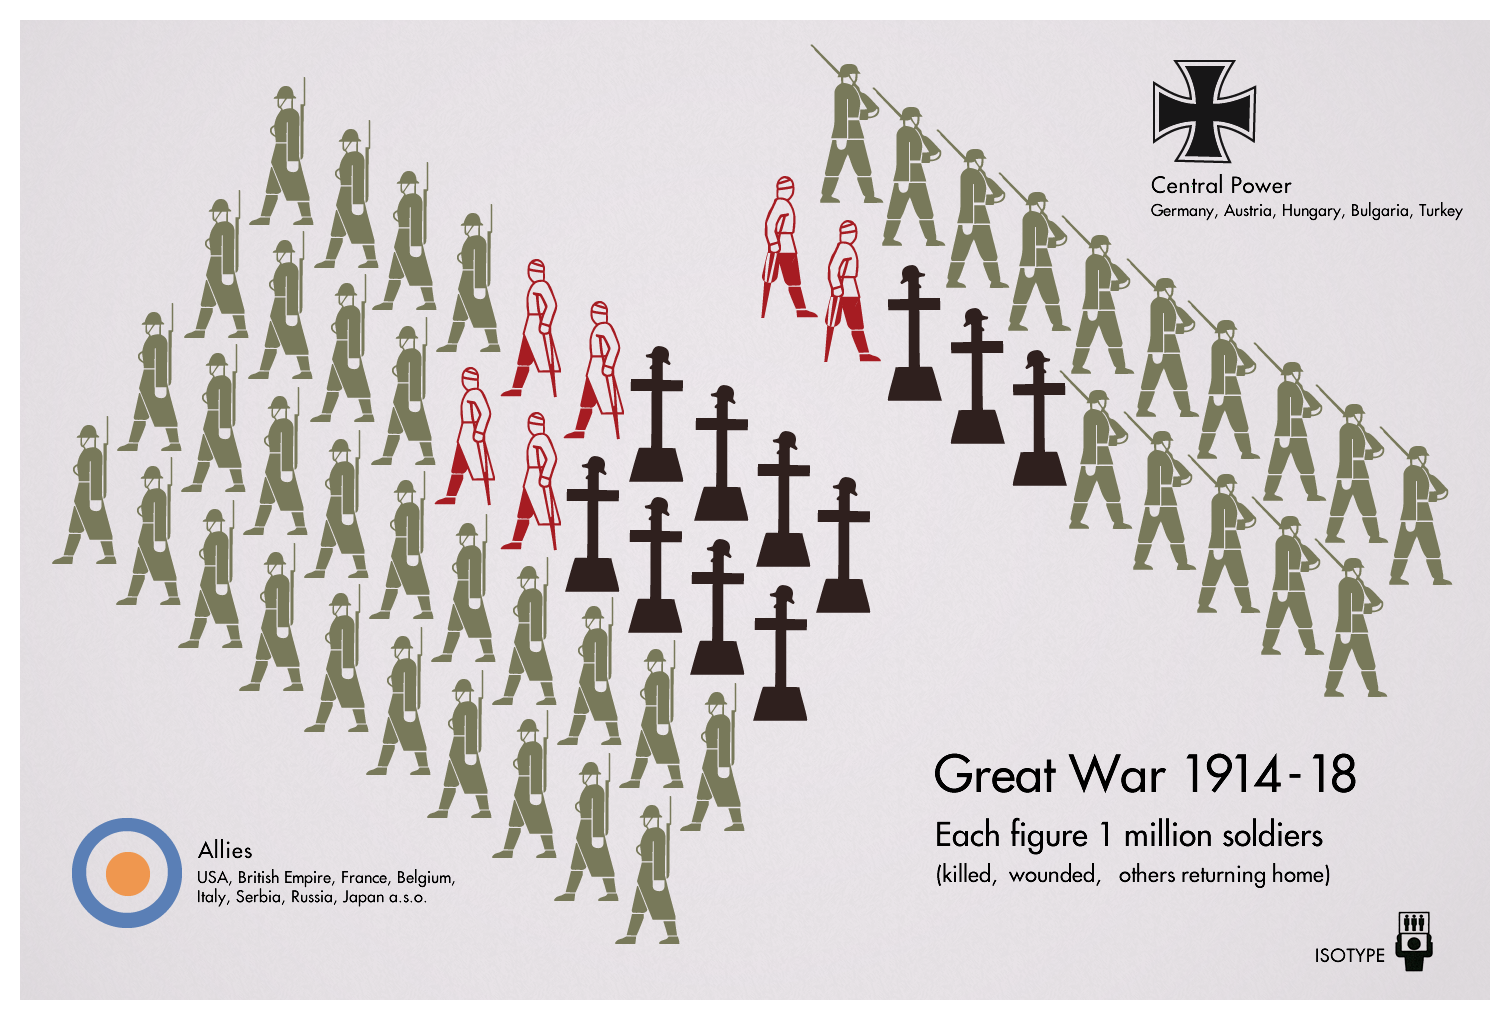 Re-creation of the 'Great War' infographic by Neurath & Arntz